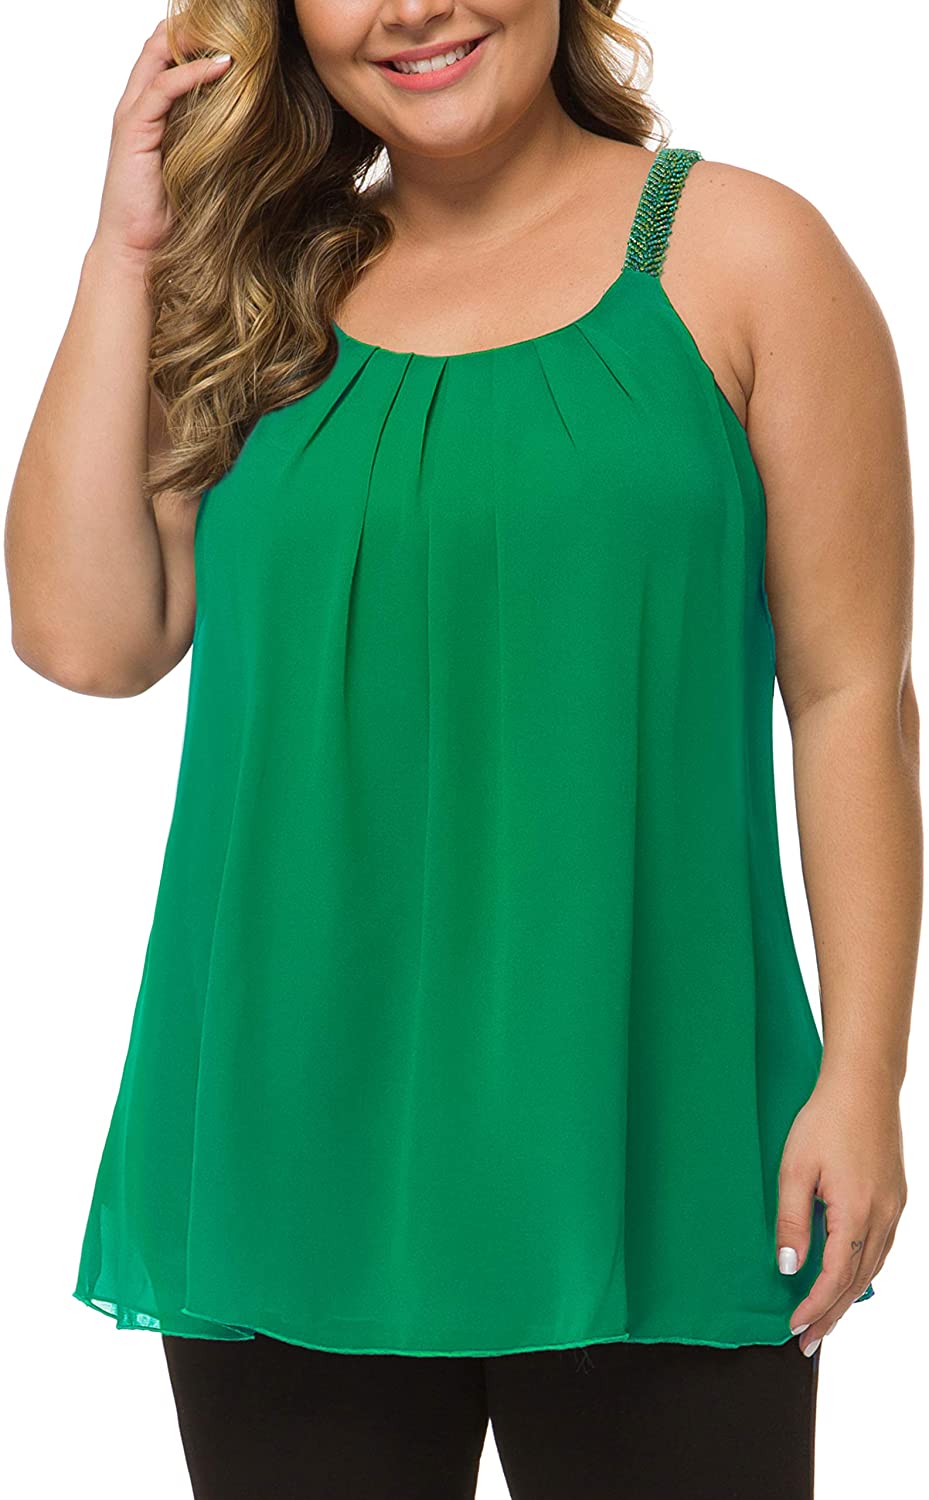 MANER Women's Plus Size Cami Casual Pleated Chiffon Tank Top with Beaded Strap